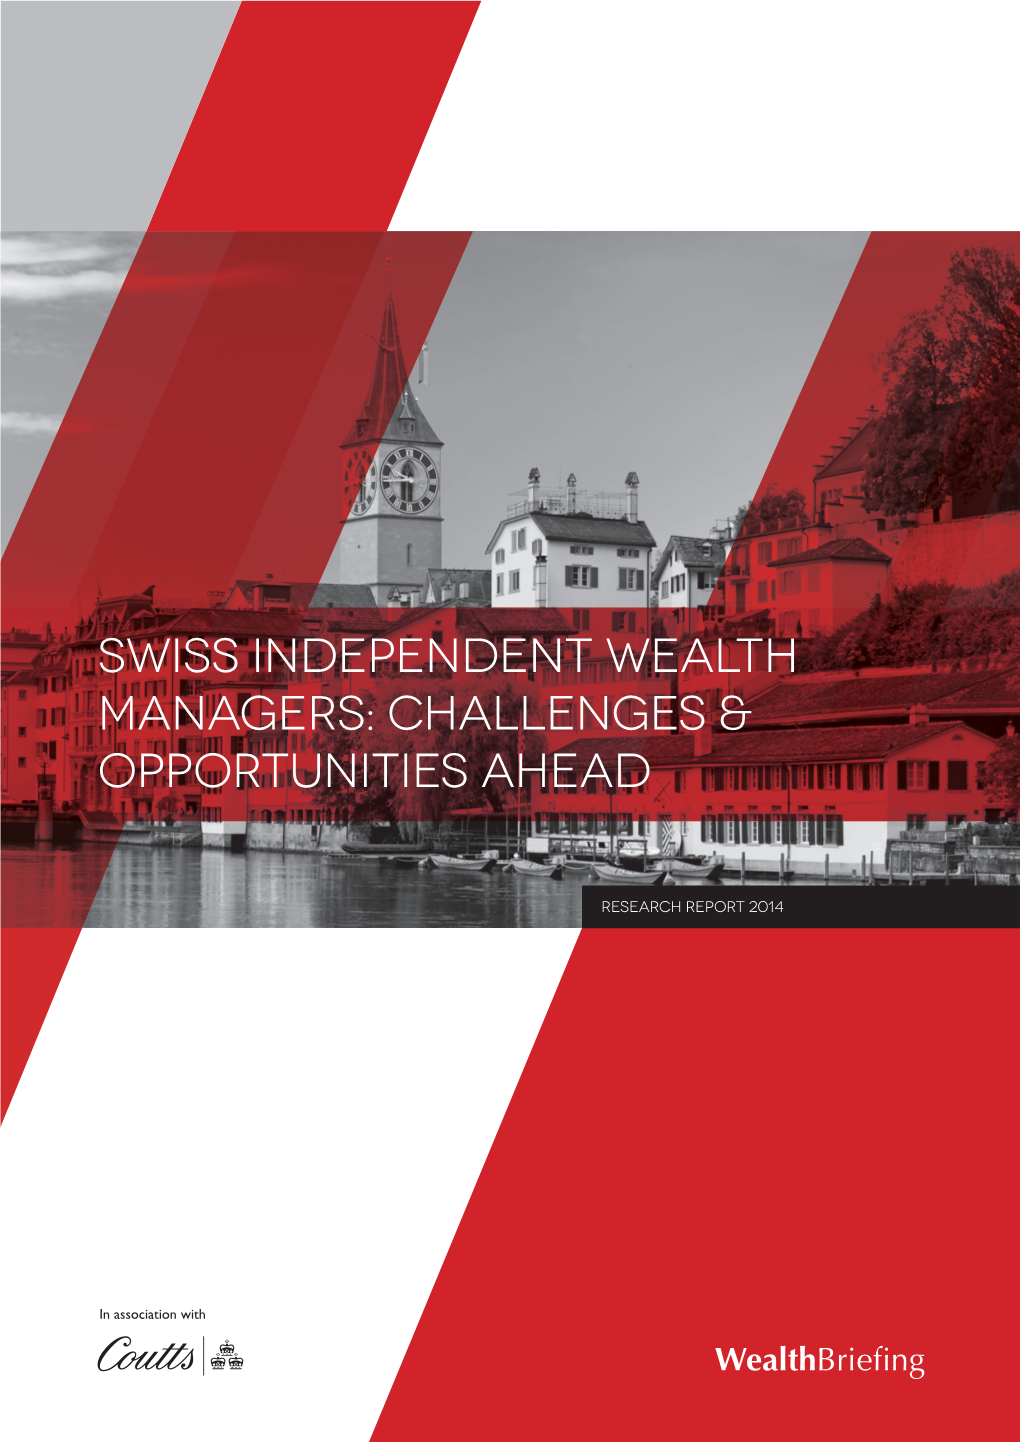 Swiss Independent Wealth Managers: Challenges & Opportunities Ahead